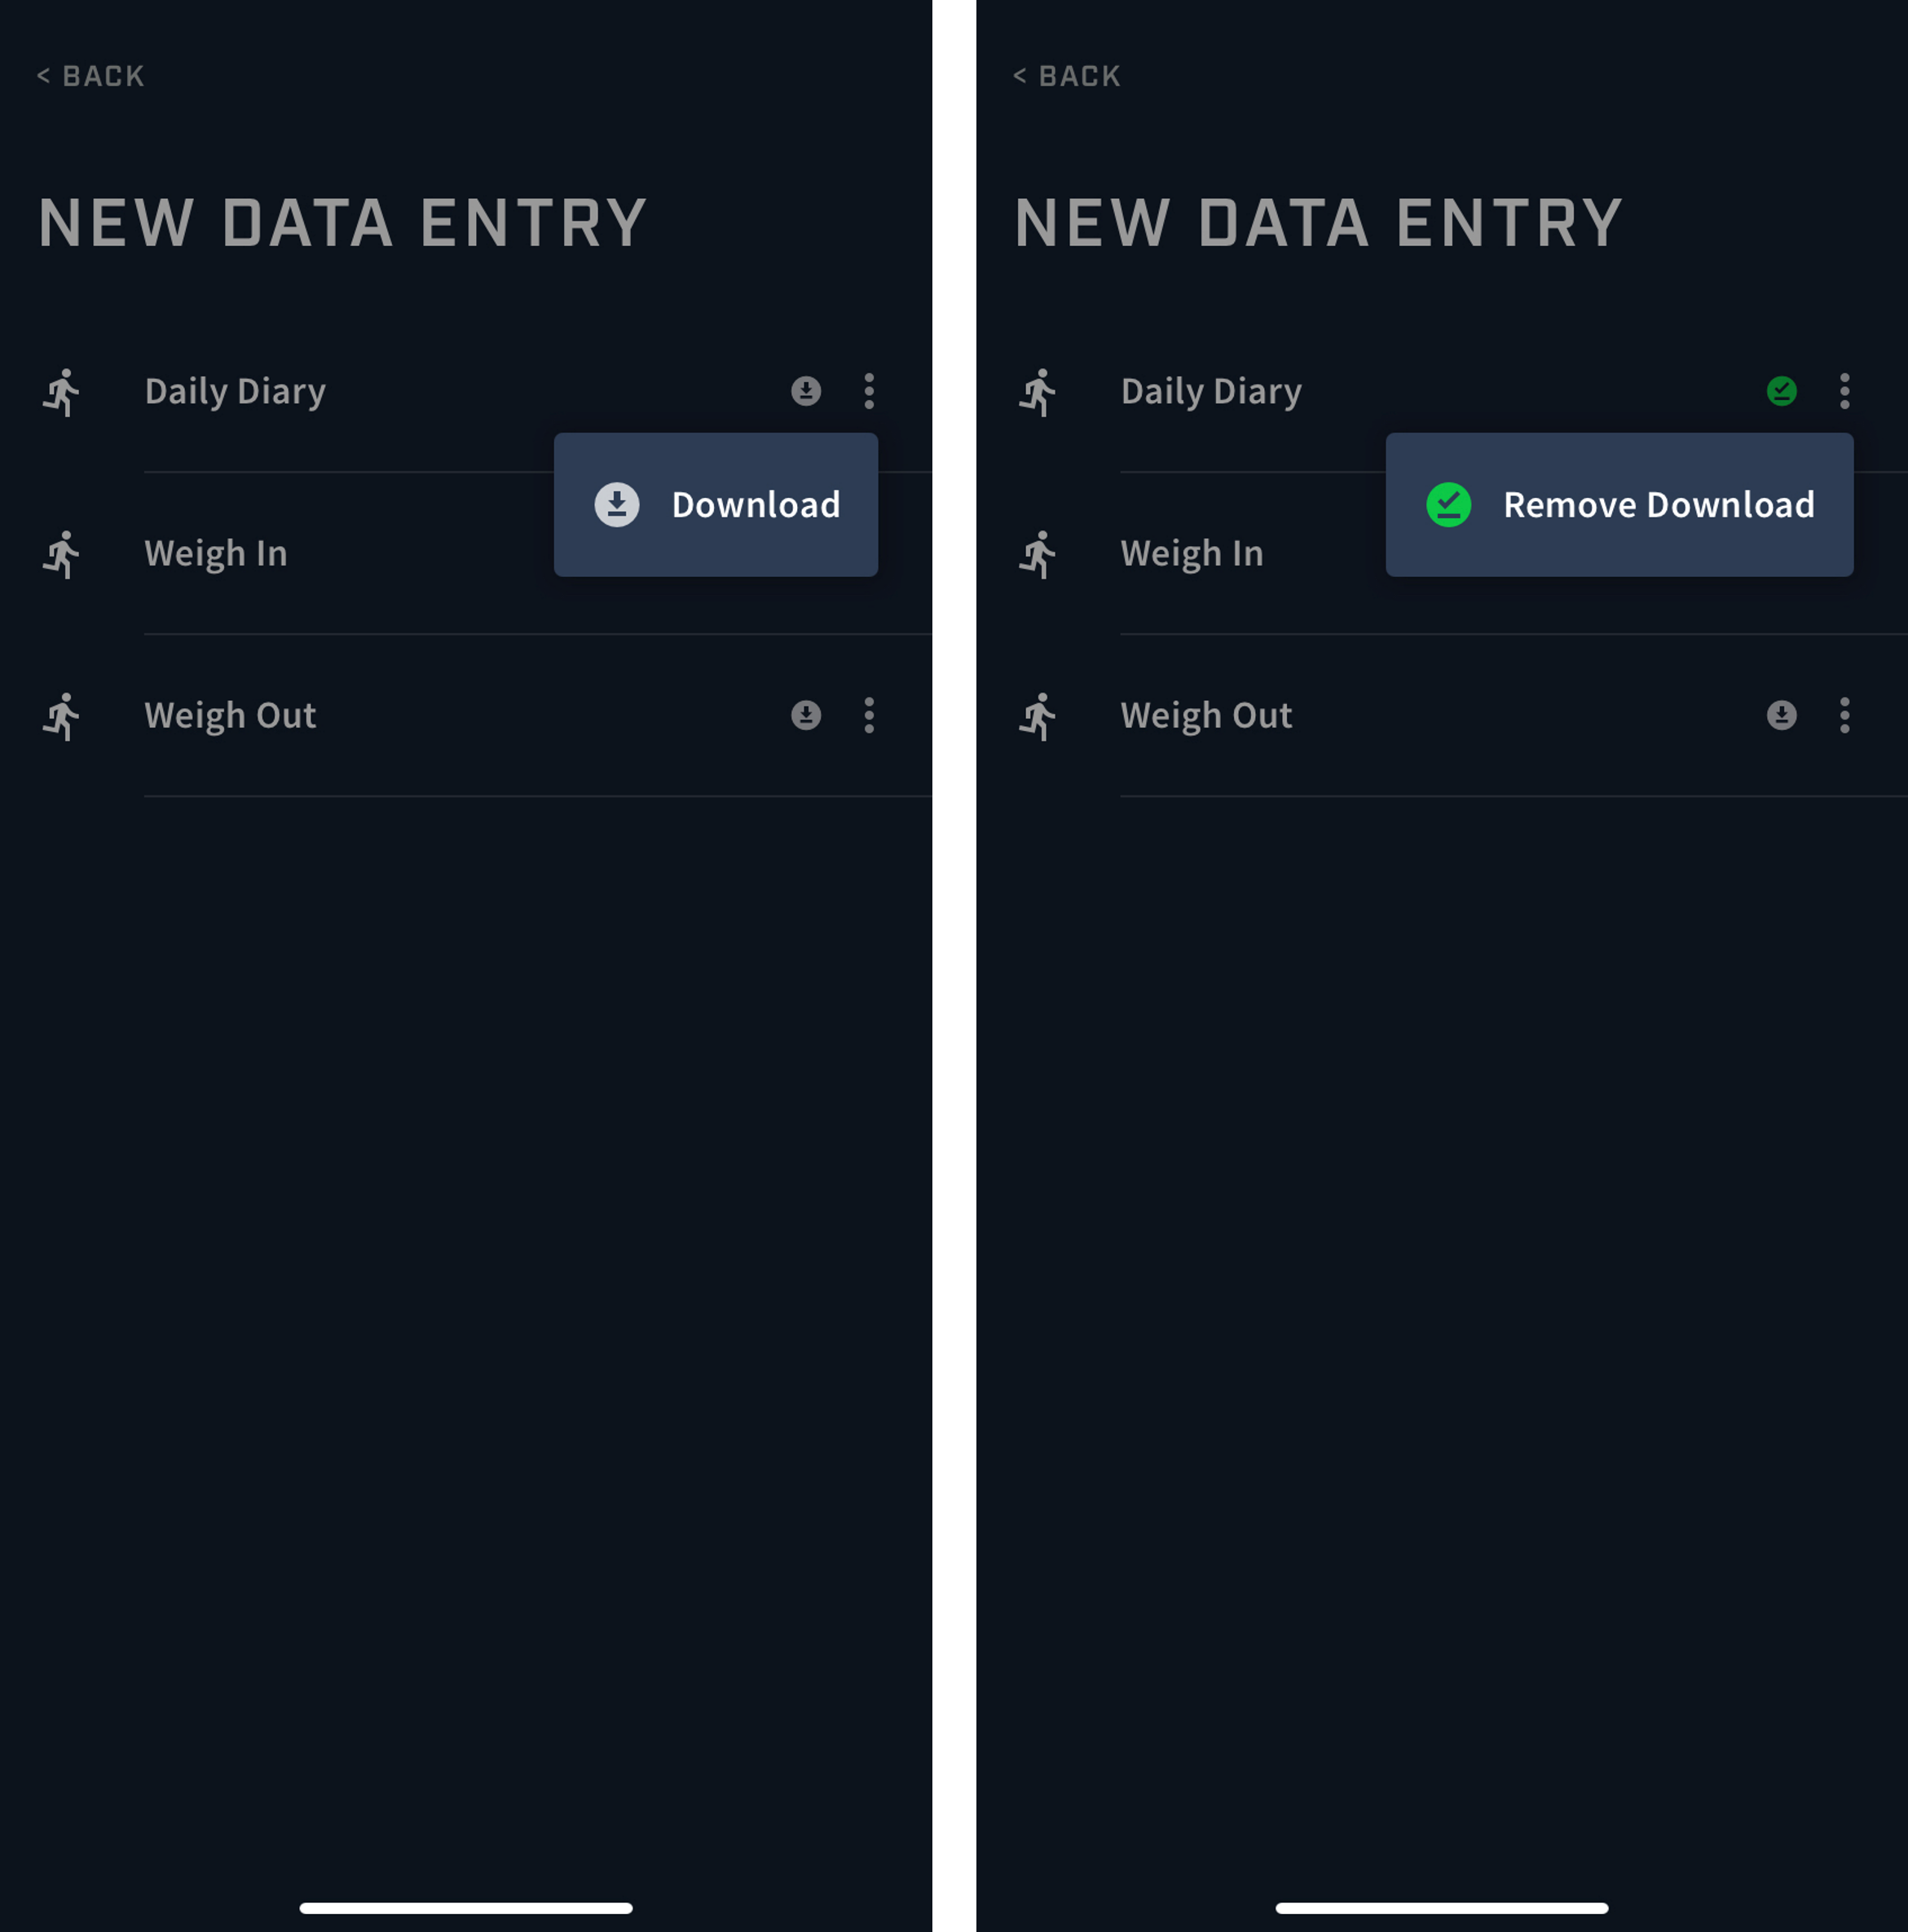 Two screenshots of the New data entry screen on the Athlete app. The buttons in the pop-up window allow you to download an event form for offline use, or remove a downloaded event form if you no longer need it during offline use.